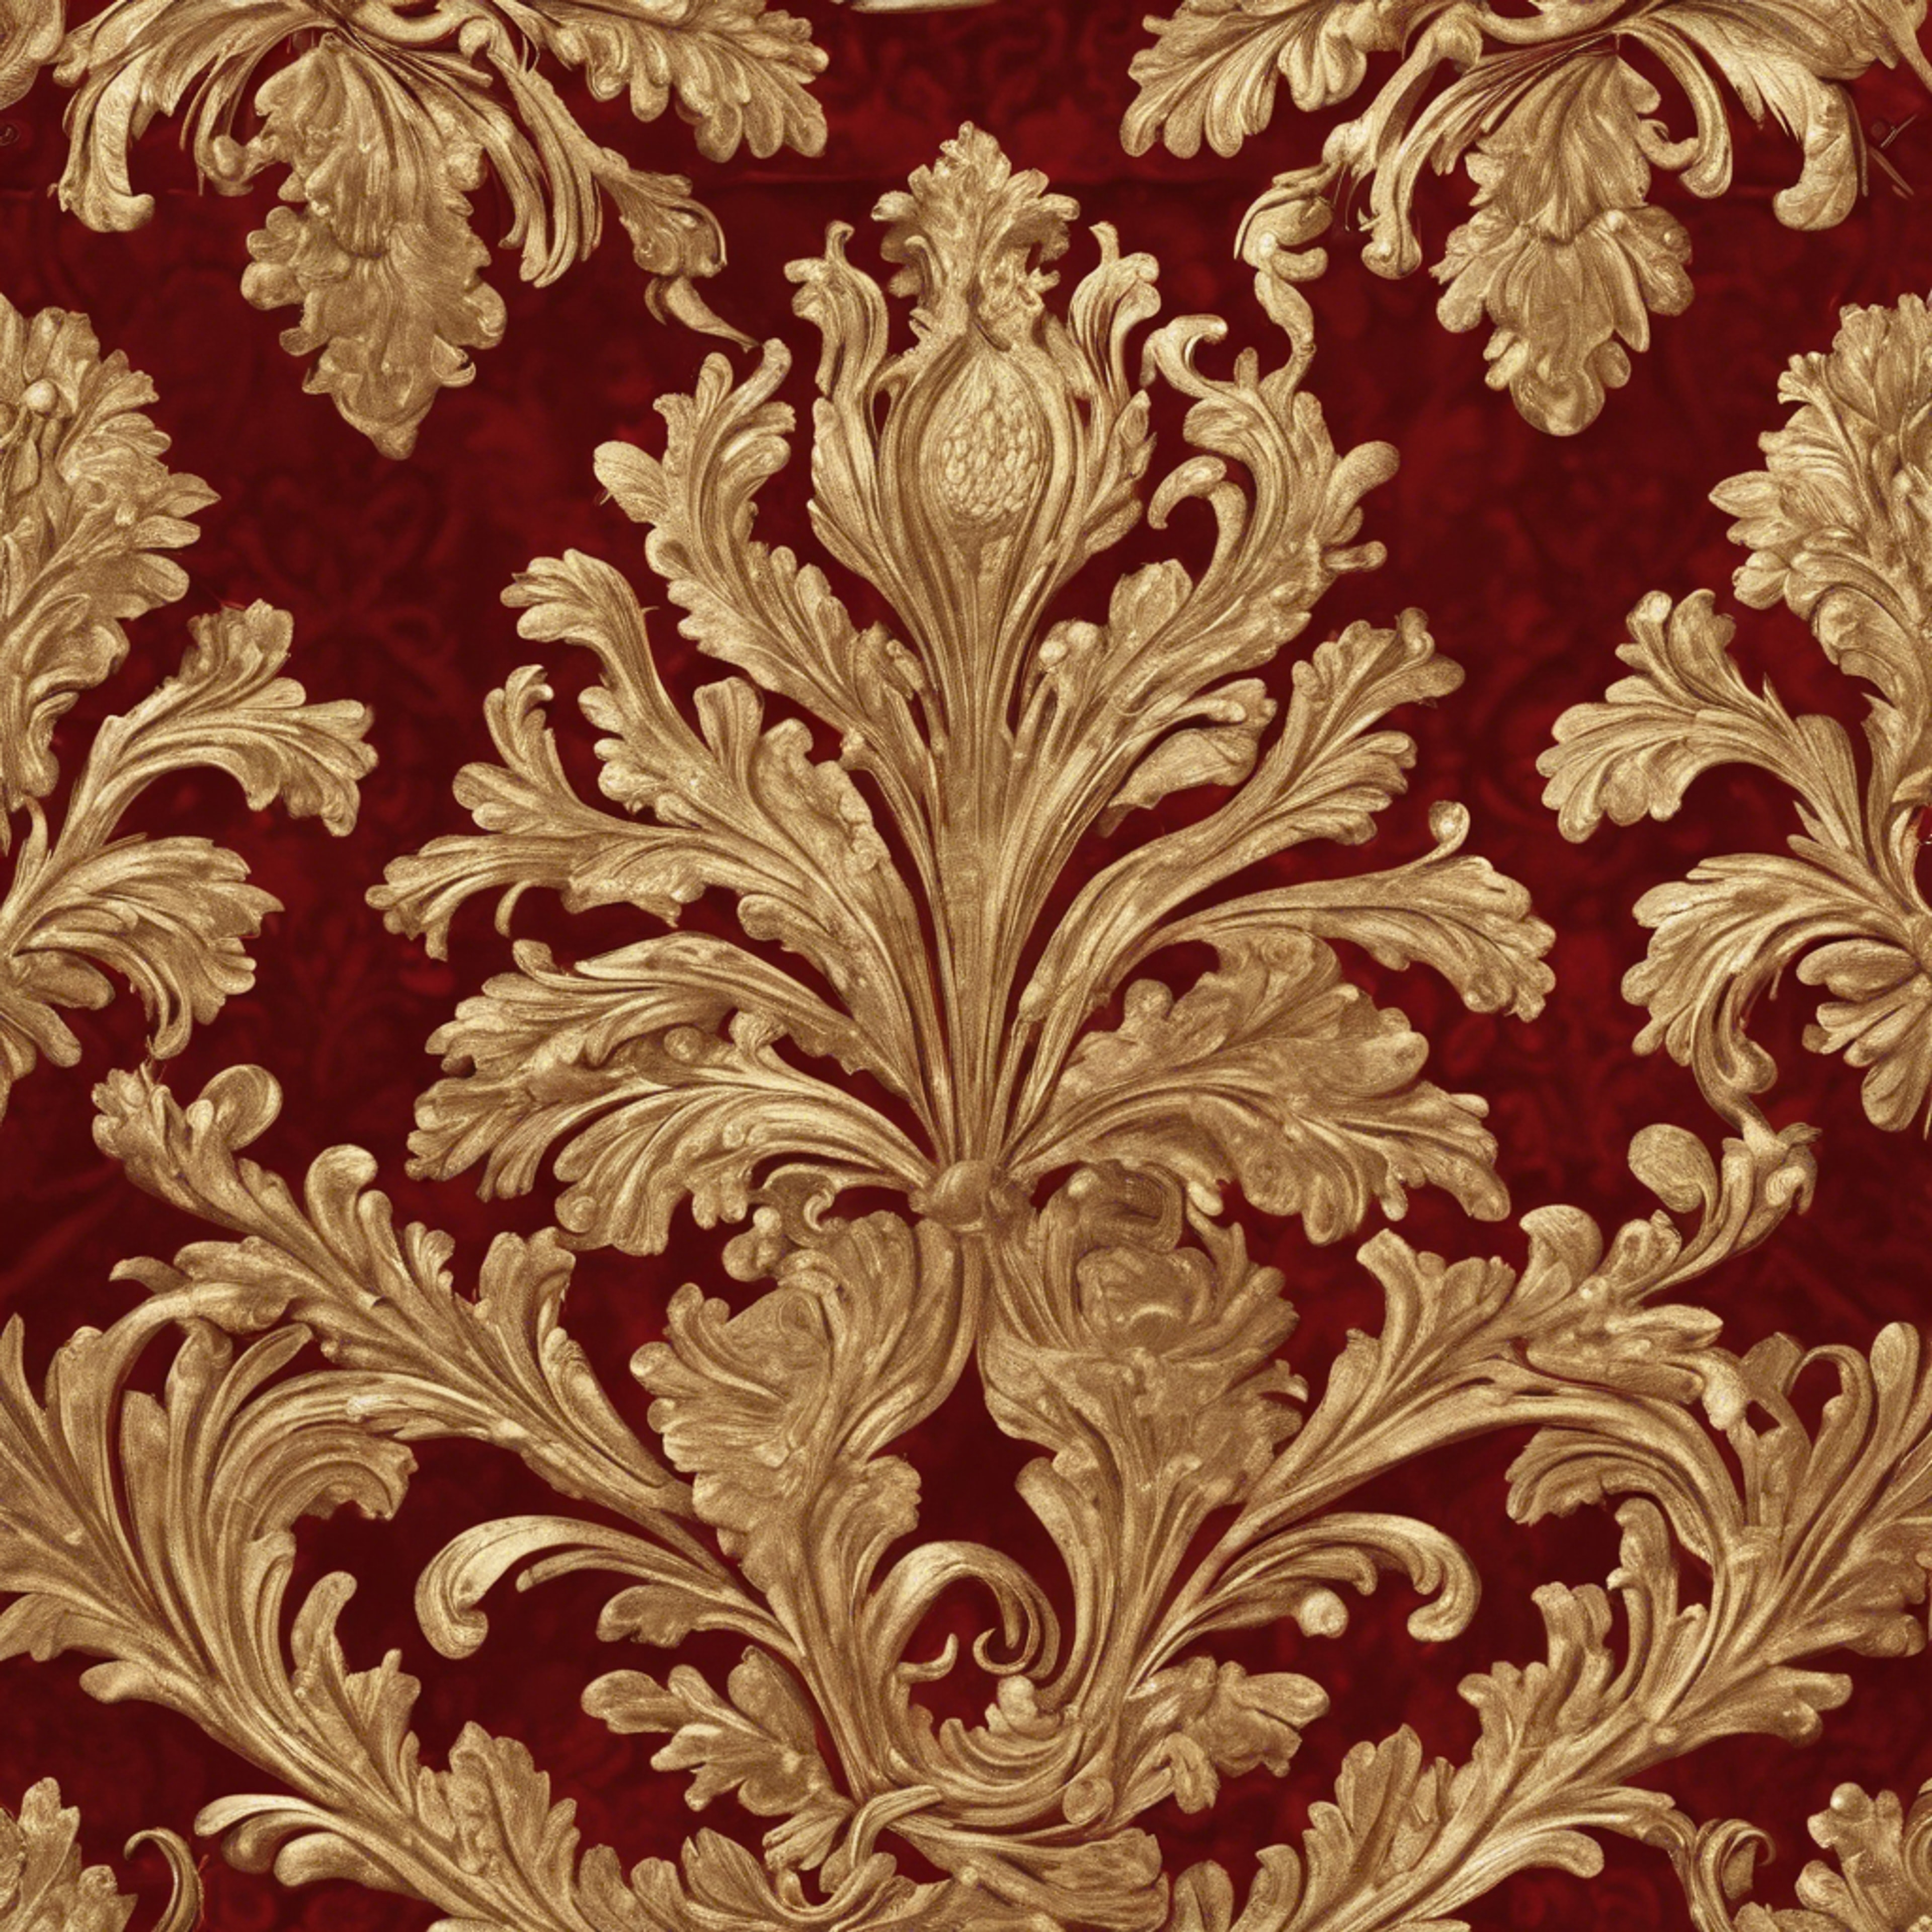 A dramatic seamless design of antique gold damask on a canvas of cardinal red velvet. Wallpaper[ac0bd922427a4985975e]